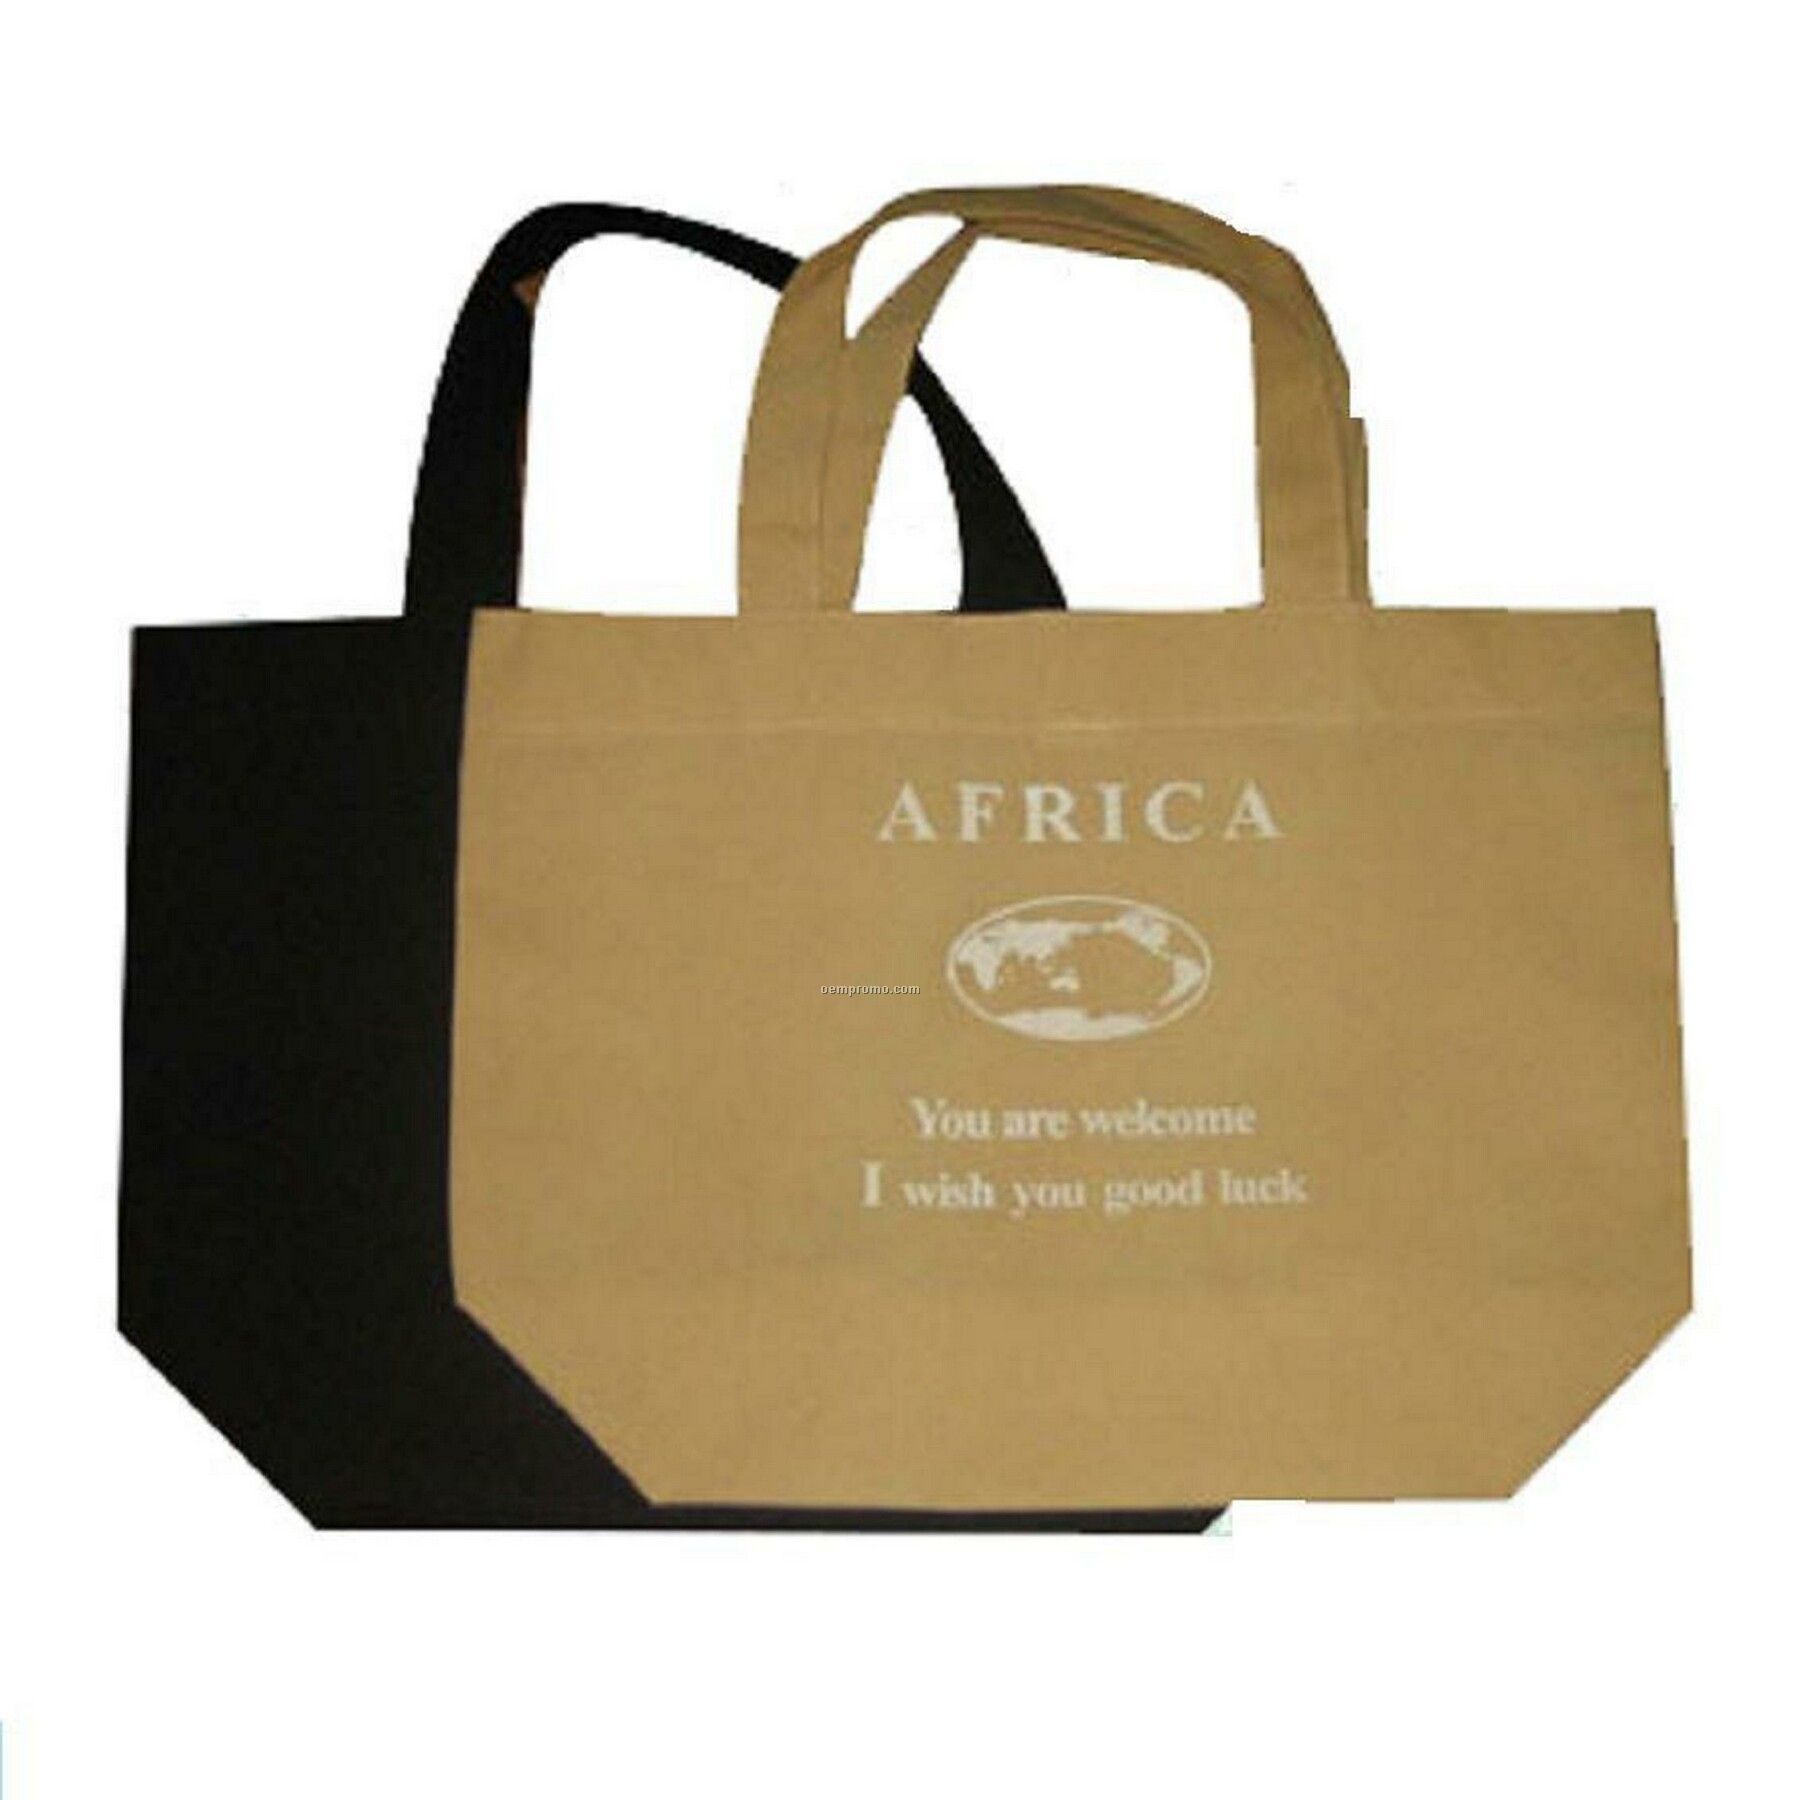 High Quality Non Woven Tote Bag. 80 Gsm Fabric, Measures 15"W X 13"H